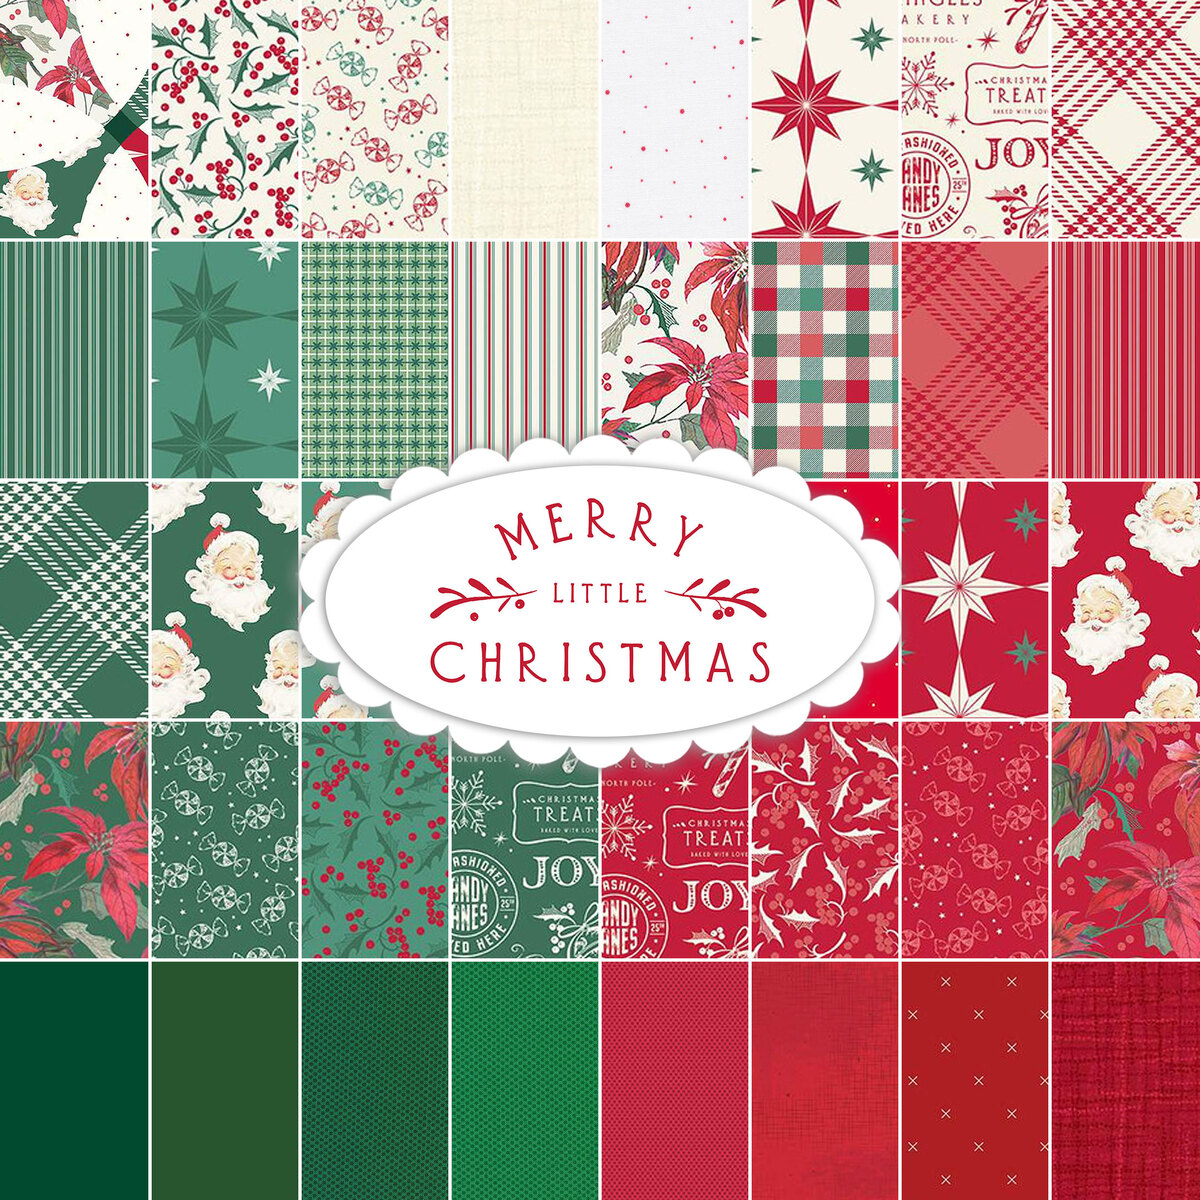 Cozy Christmas Green Wrapping Paper Yardage